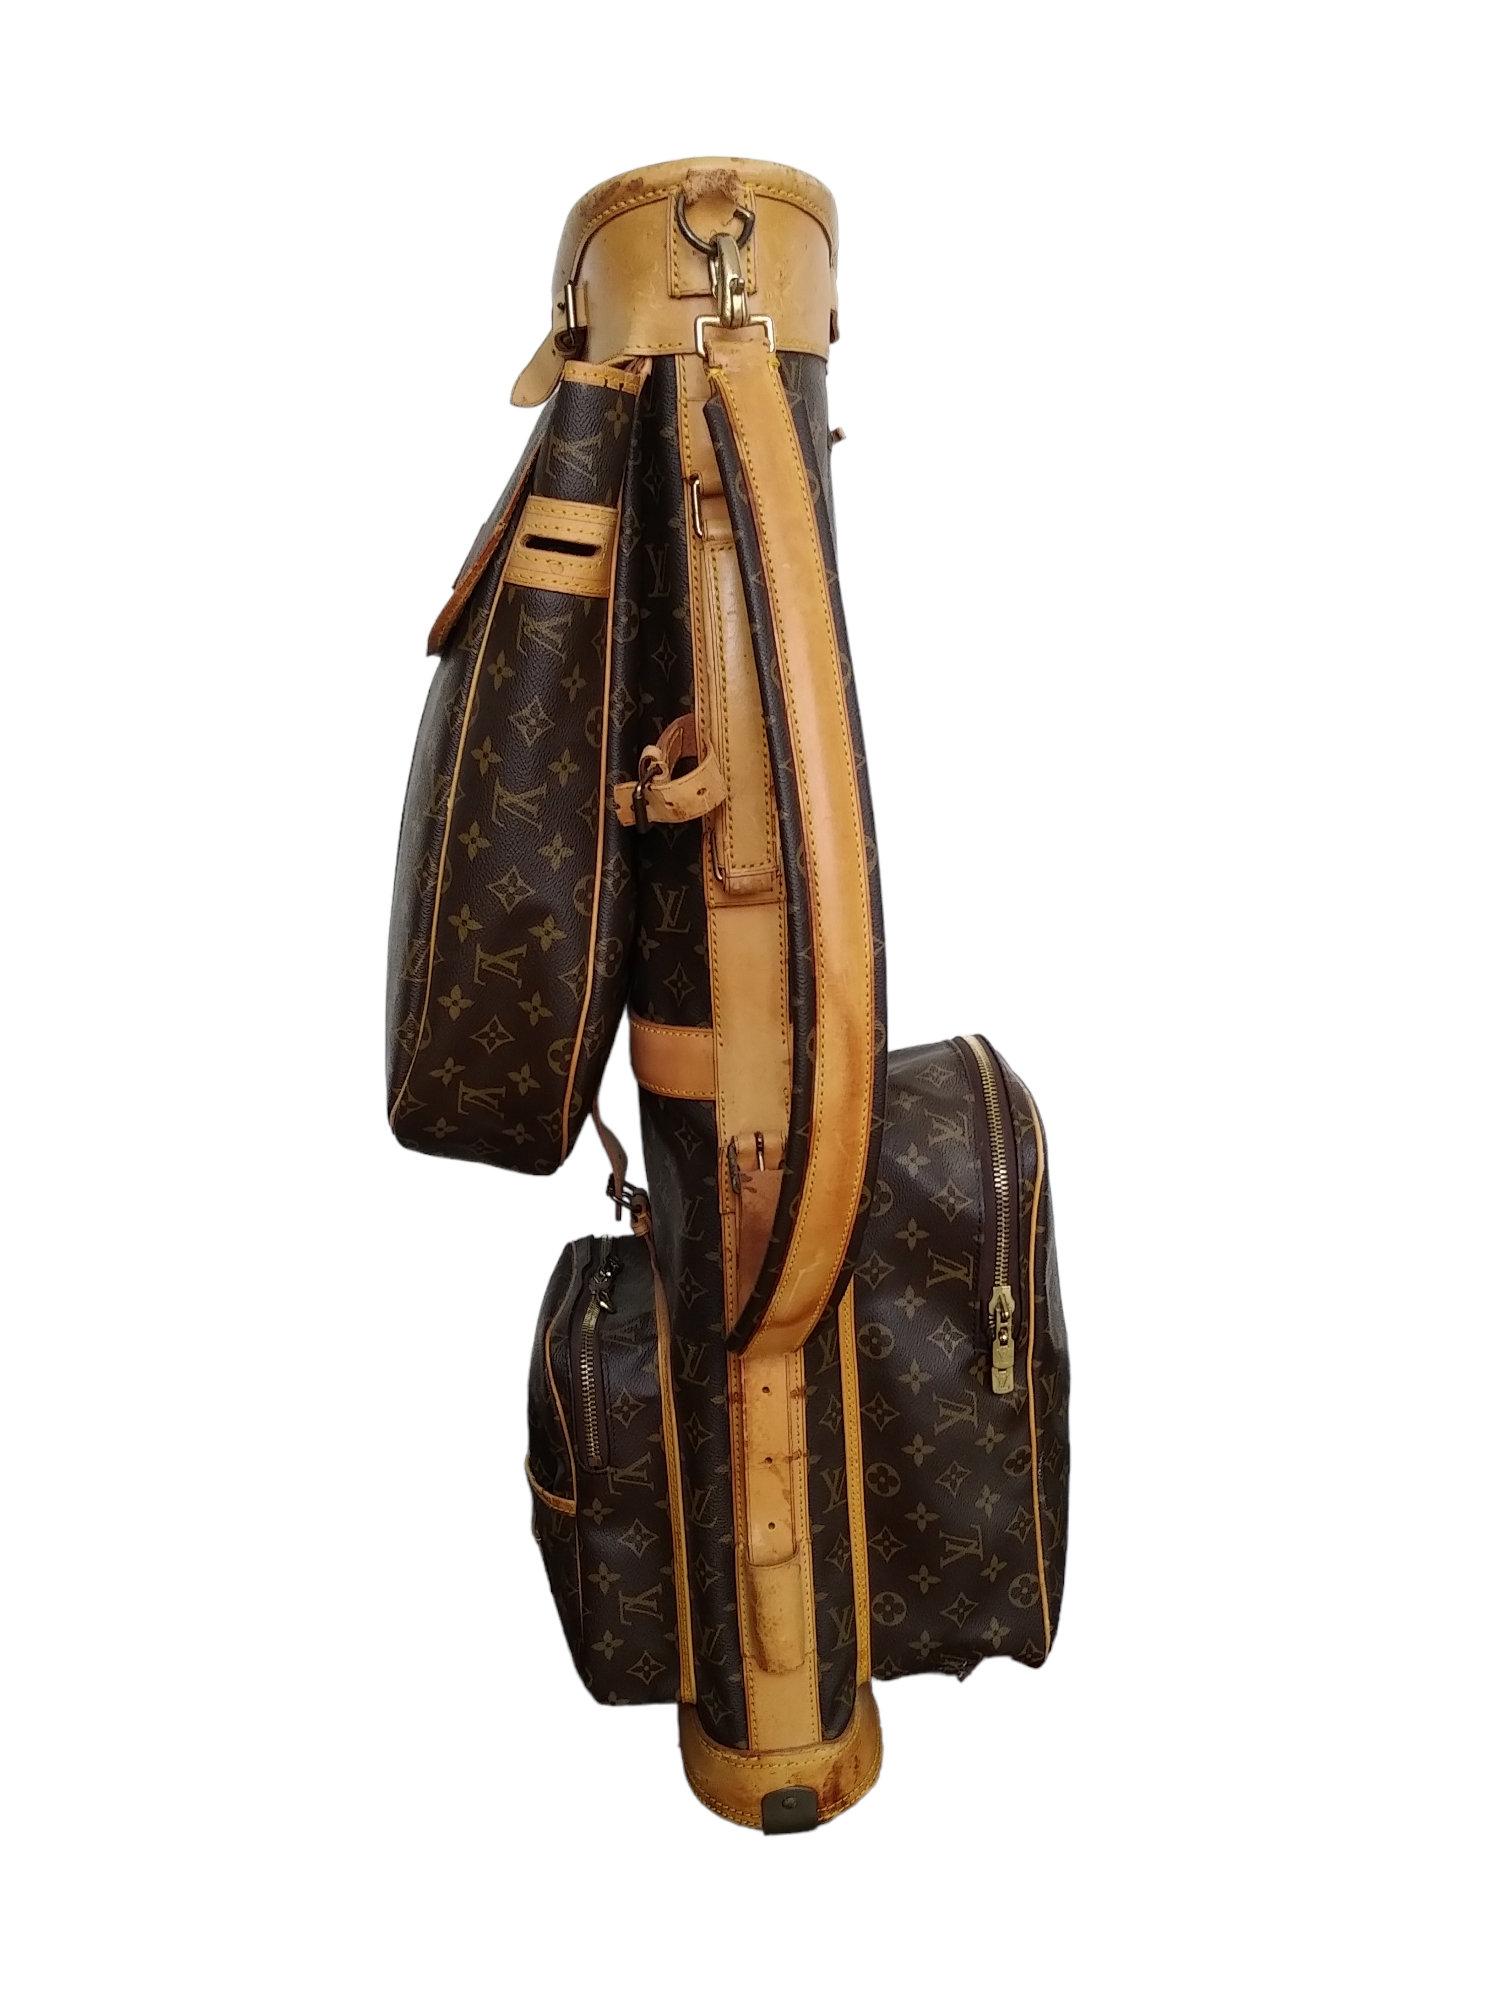 1980s Louis Vuitton Monogram Golf Bag
- 100% authentic Vuitton
- monogram canvas
- 3 zippered compartments, handle and shoulder strap and monogram covered dividers for golf clubs
